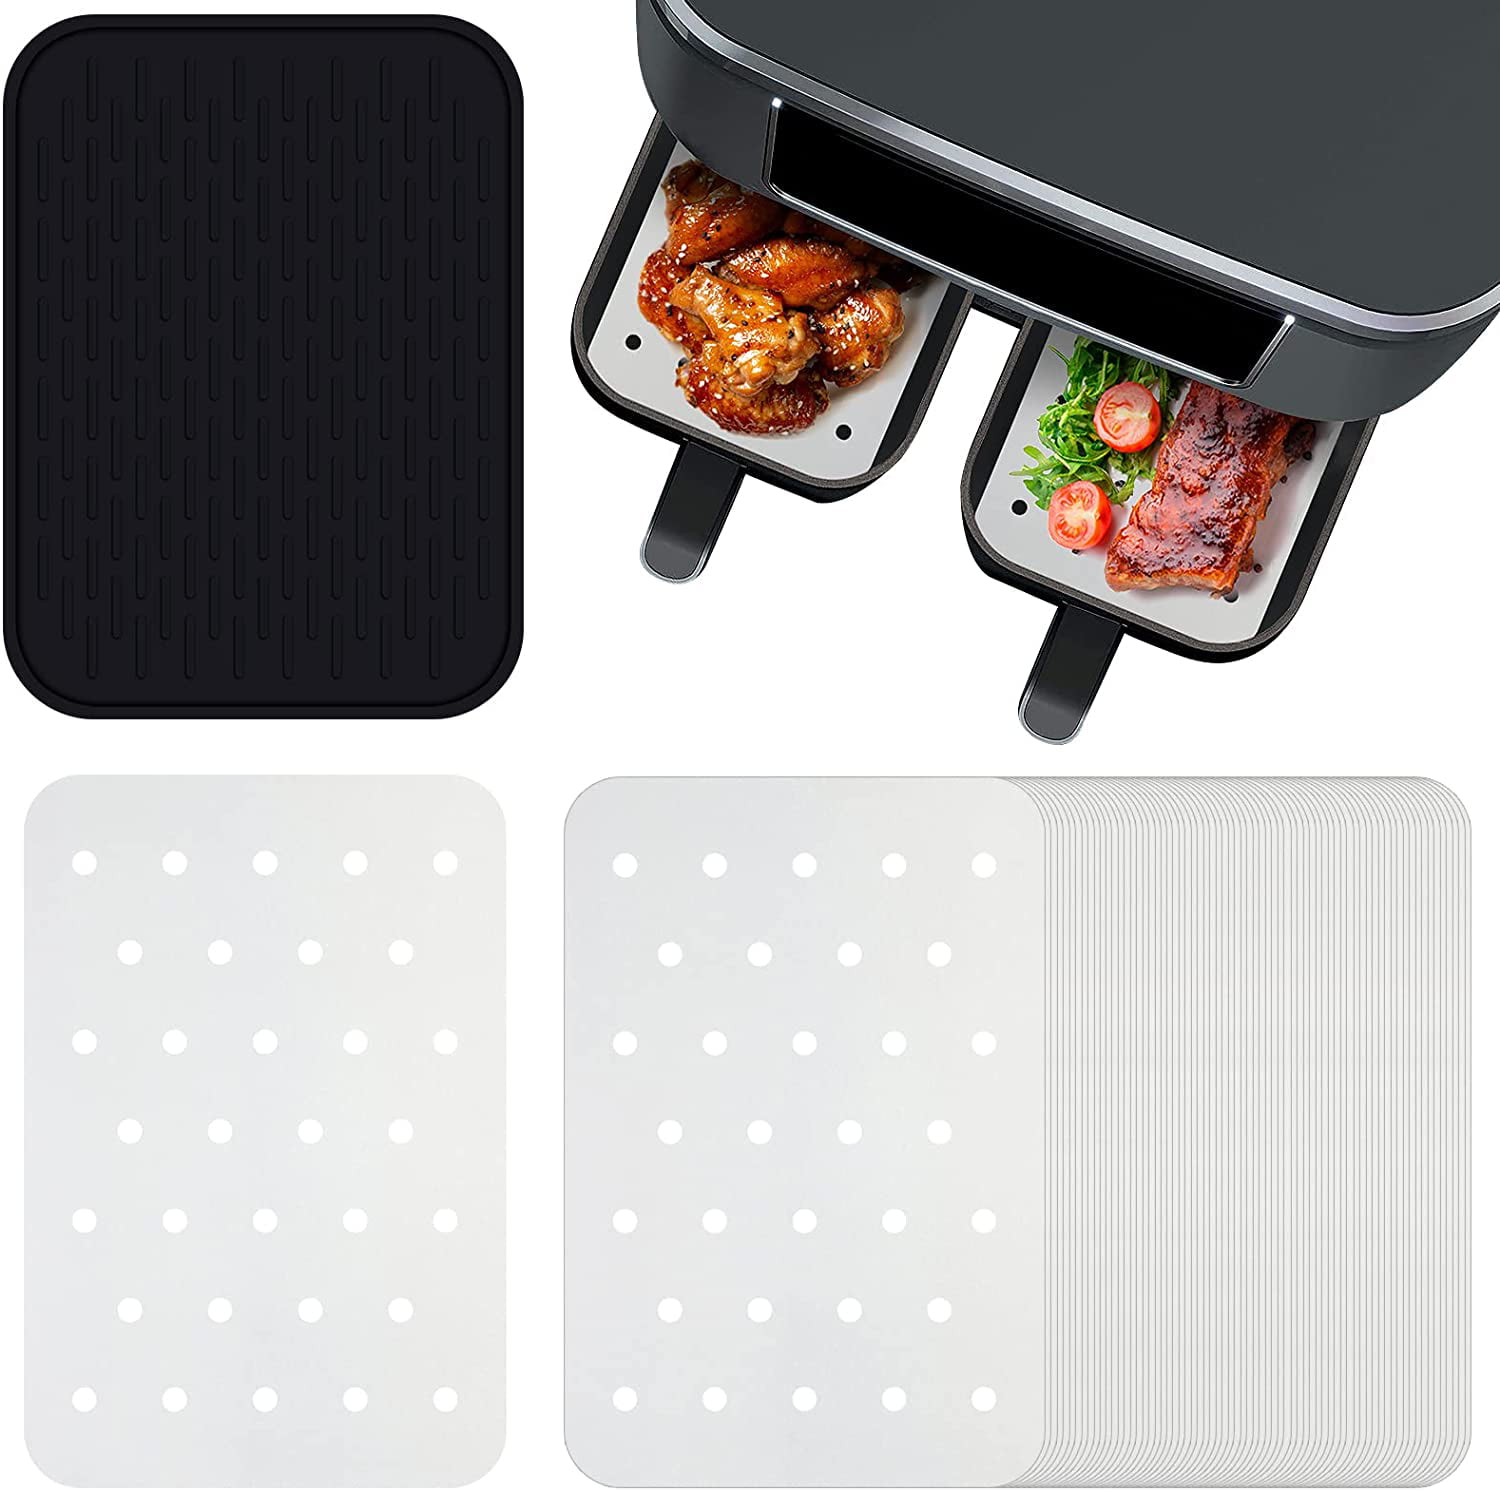 Grilling 200Pcs 8 Inch Square Heavy Duty Air Fryer Liners Uses for Baking Cookies Cooking Air Fryer Air Fryer Liners 8inch 